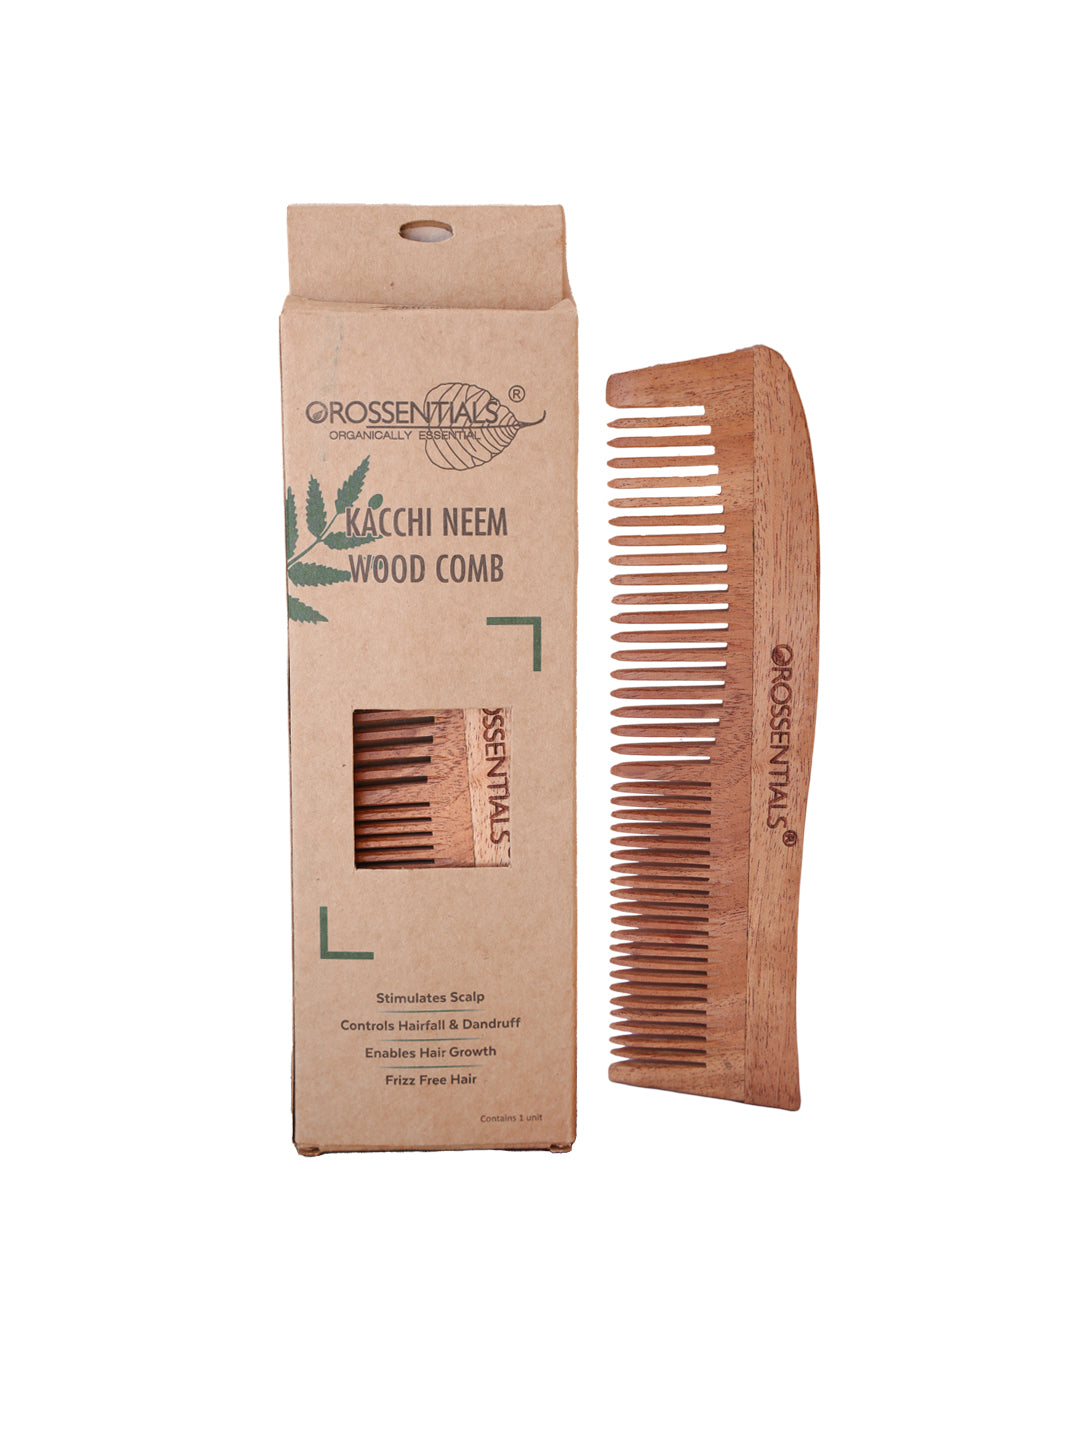 Hair brush and two in one comb - combo